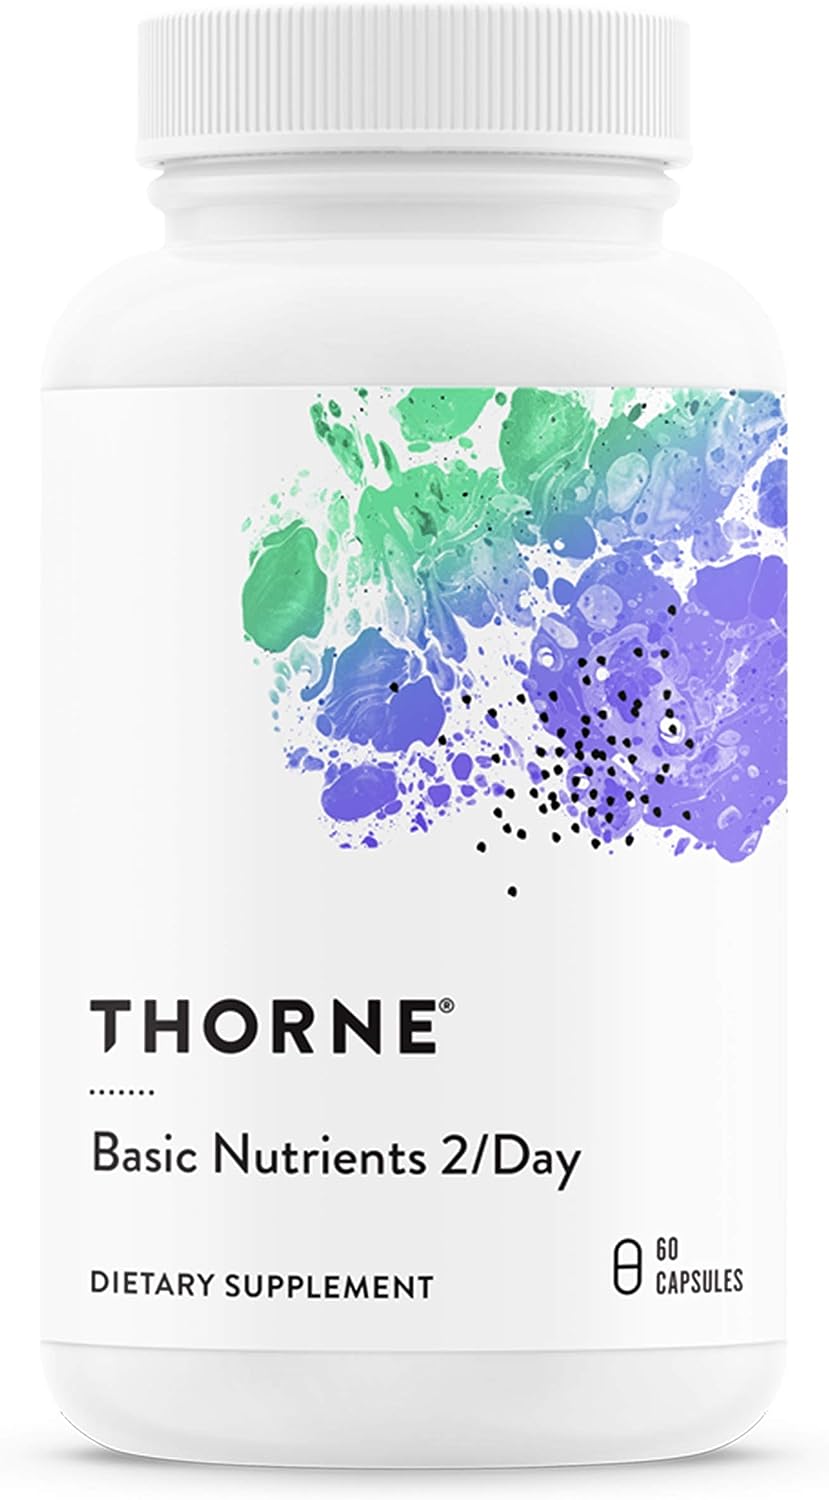 THORNE Basic Nutrients 2/Day  Omega-3 Fatty Acids Enhanced Wellness Combo - Foundational Support - 30 Servings